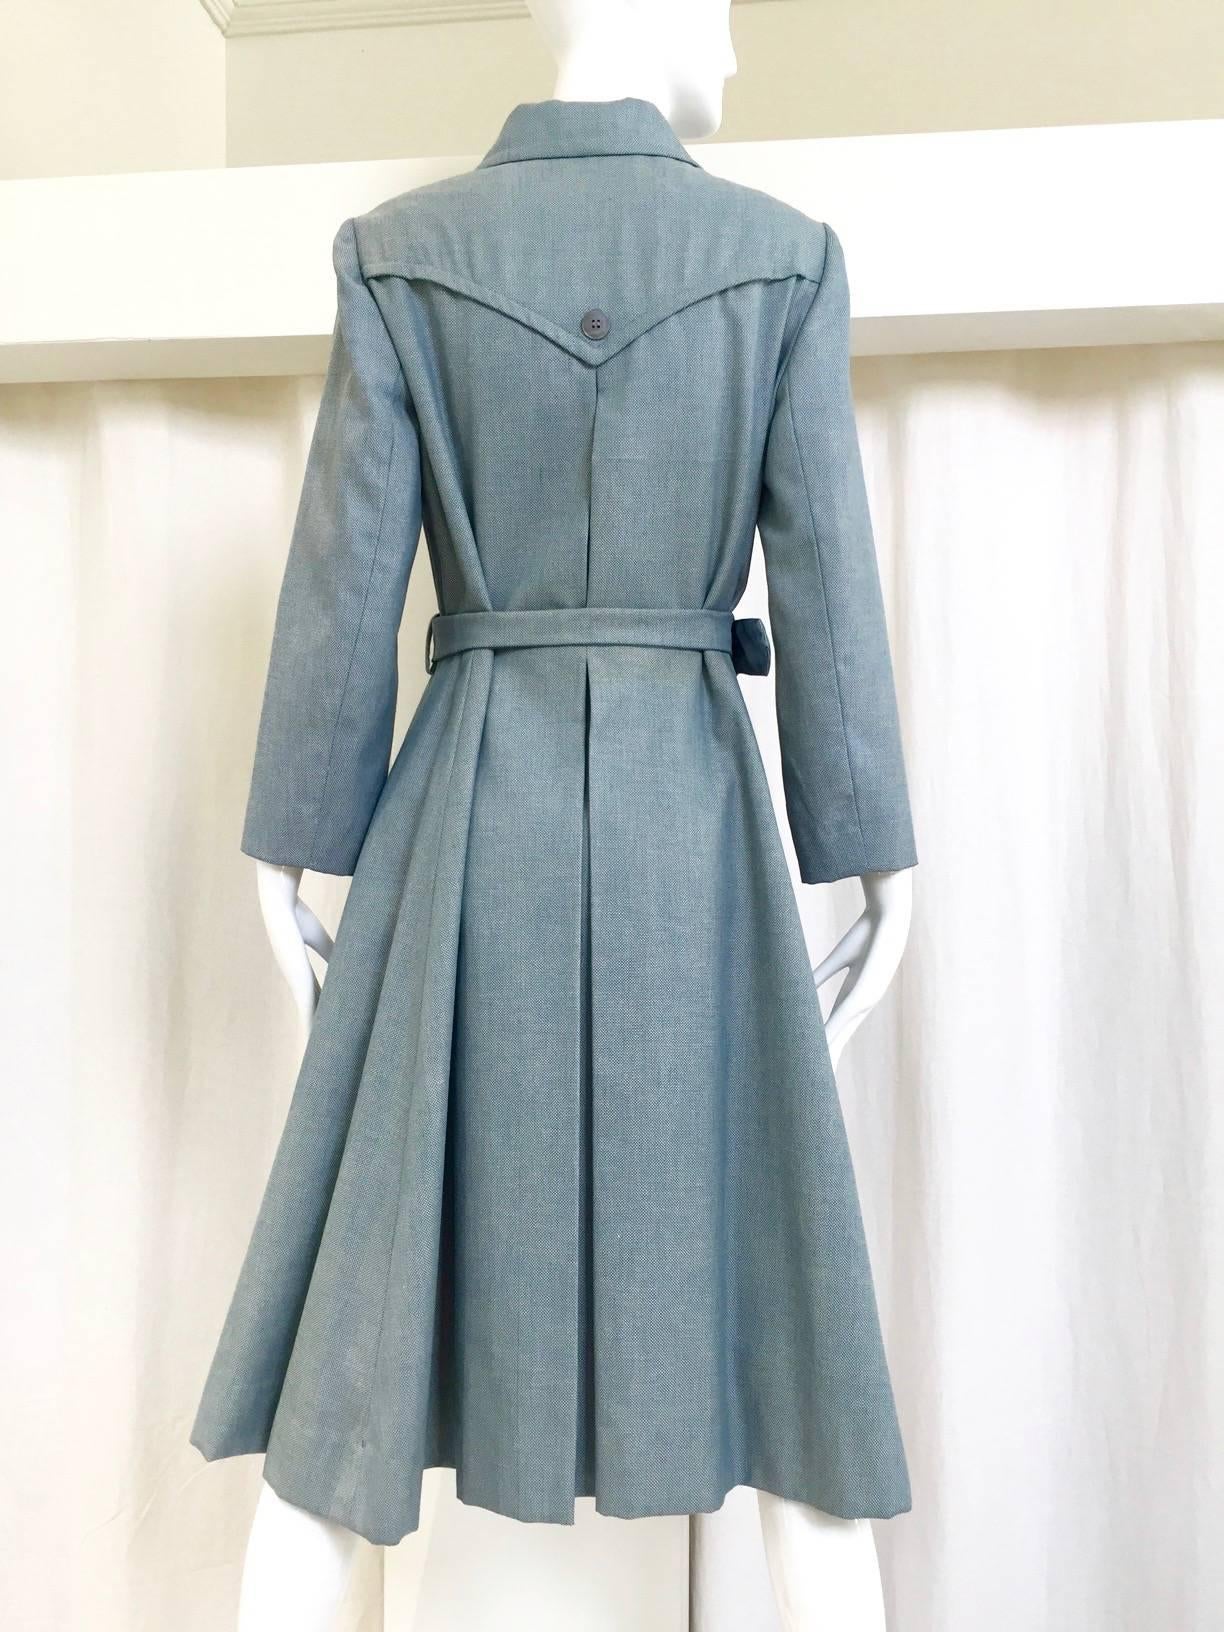 Gray 1970s Light Blue Cotton Trench Coat by Donald Brooks